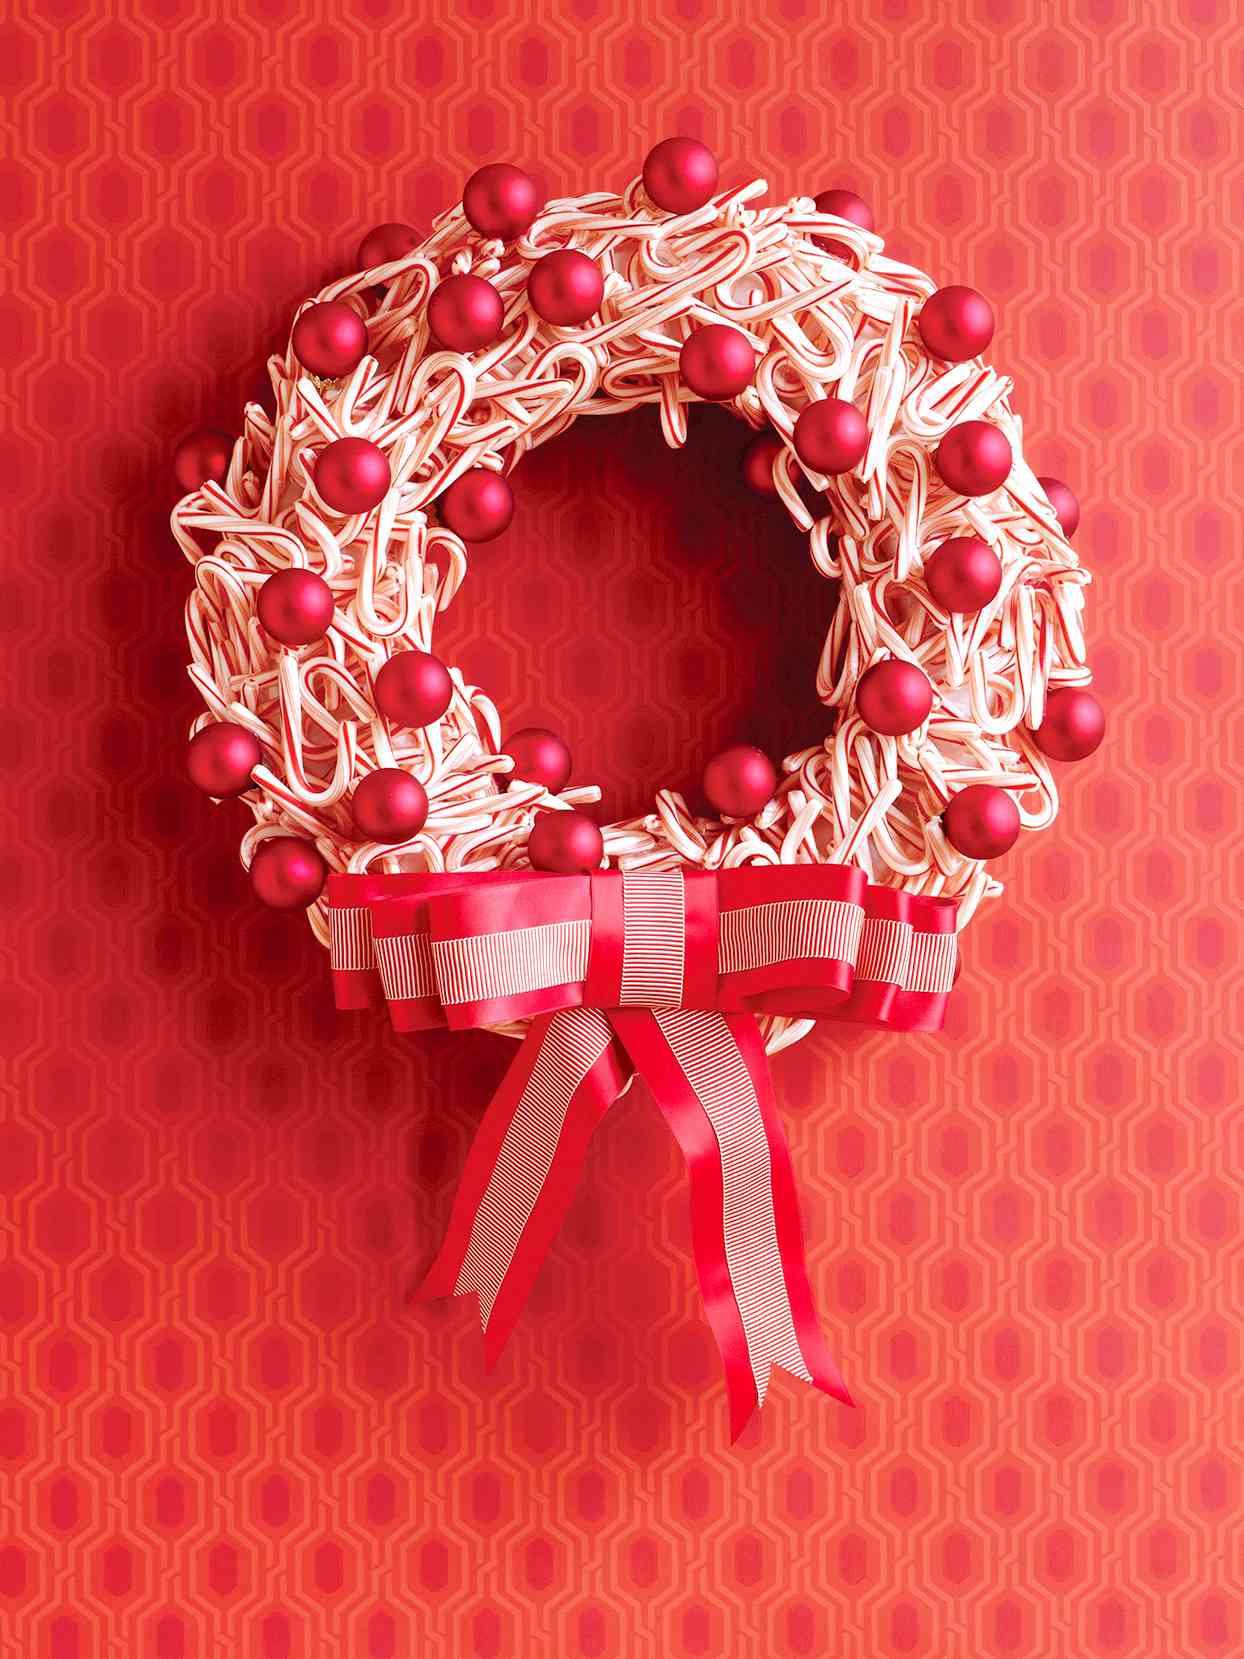 candy cane wreath with red ornaments